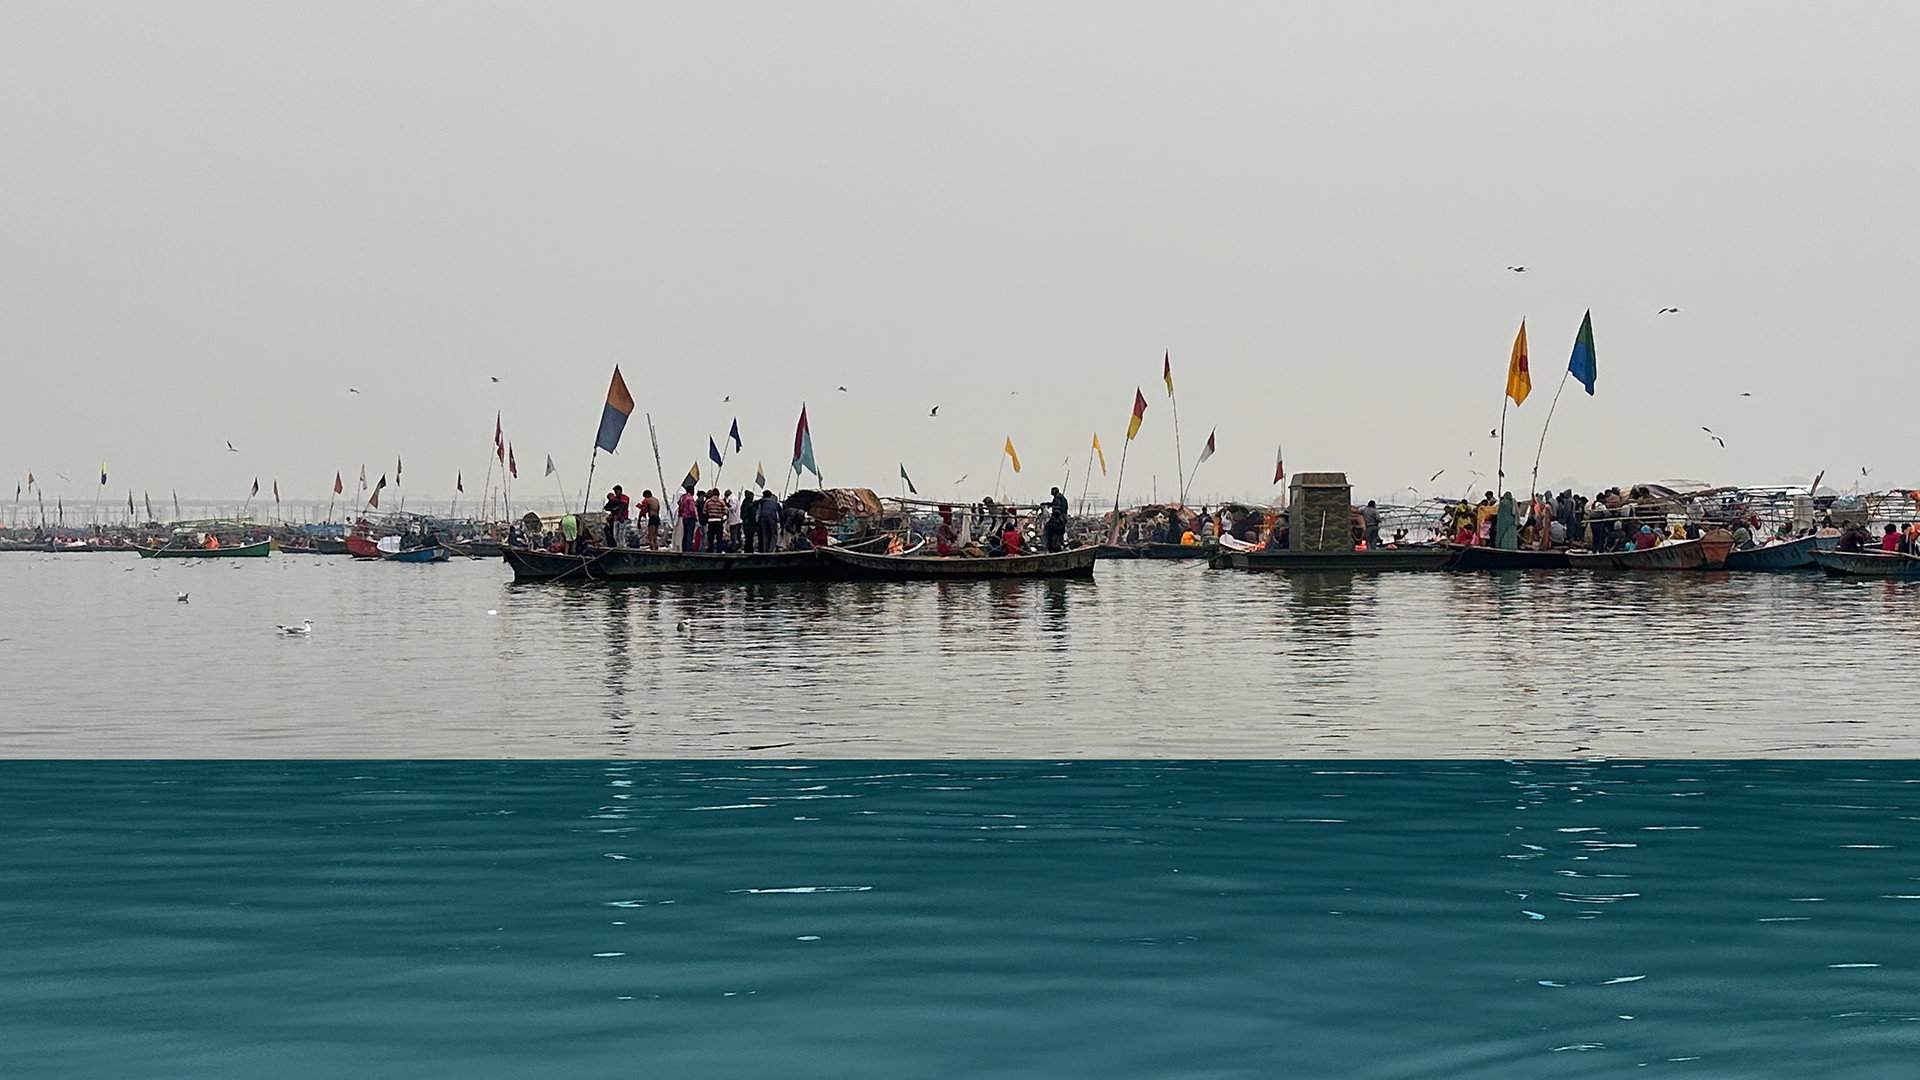 Scenic photograph capturing the confluence of two rivers, Yamuna and Ganga, featuring numerous shallow boats along the horizon marked by red, yellow, and blue flags, with people standing and sitting on them engaged in ritual activities